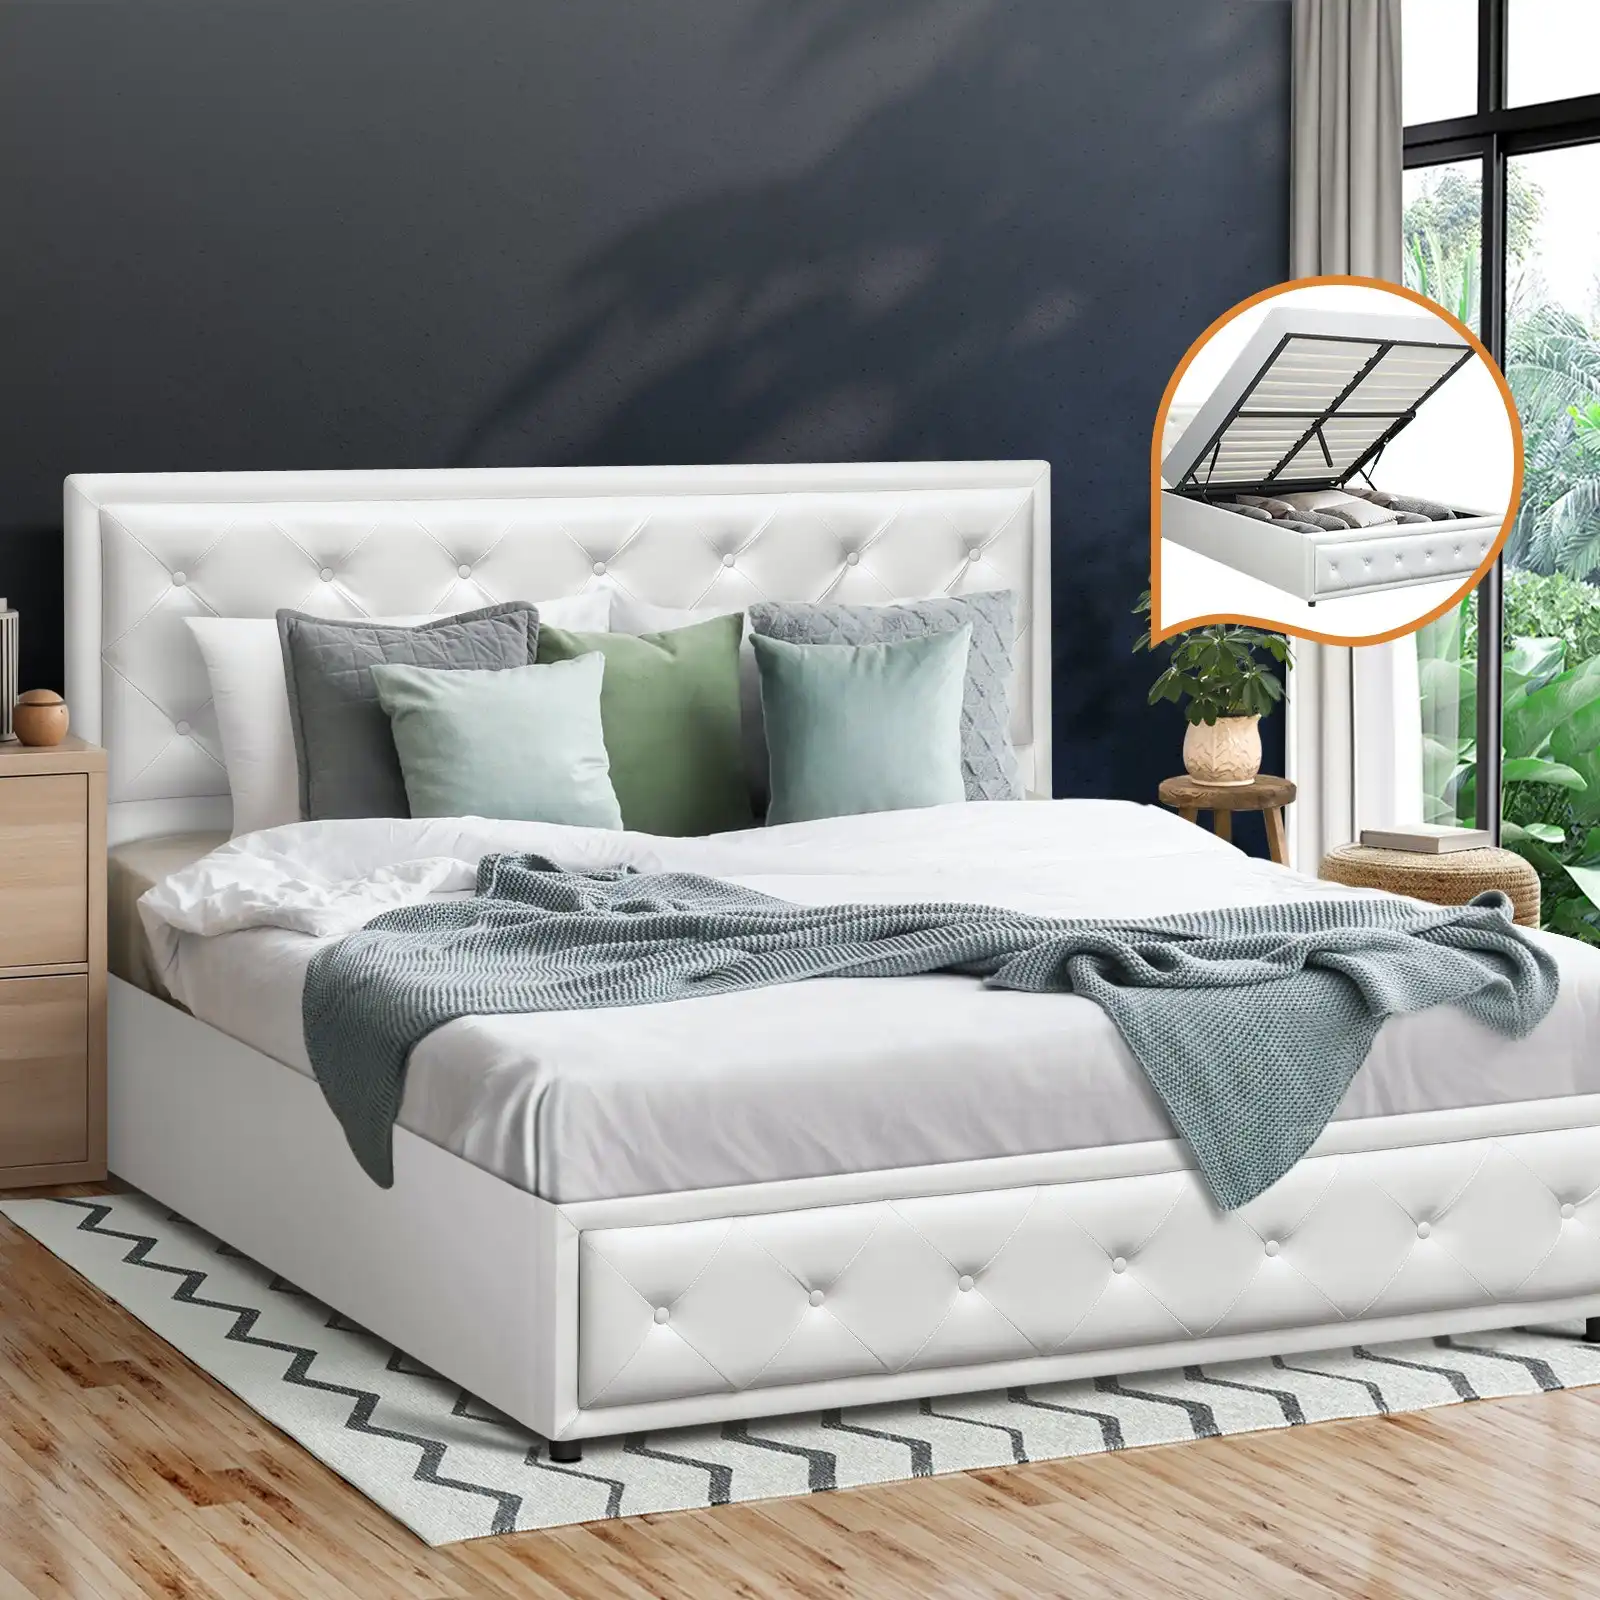 Oikiture Bed Frame Queen Size Gas Lift Base With Storage White Leather